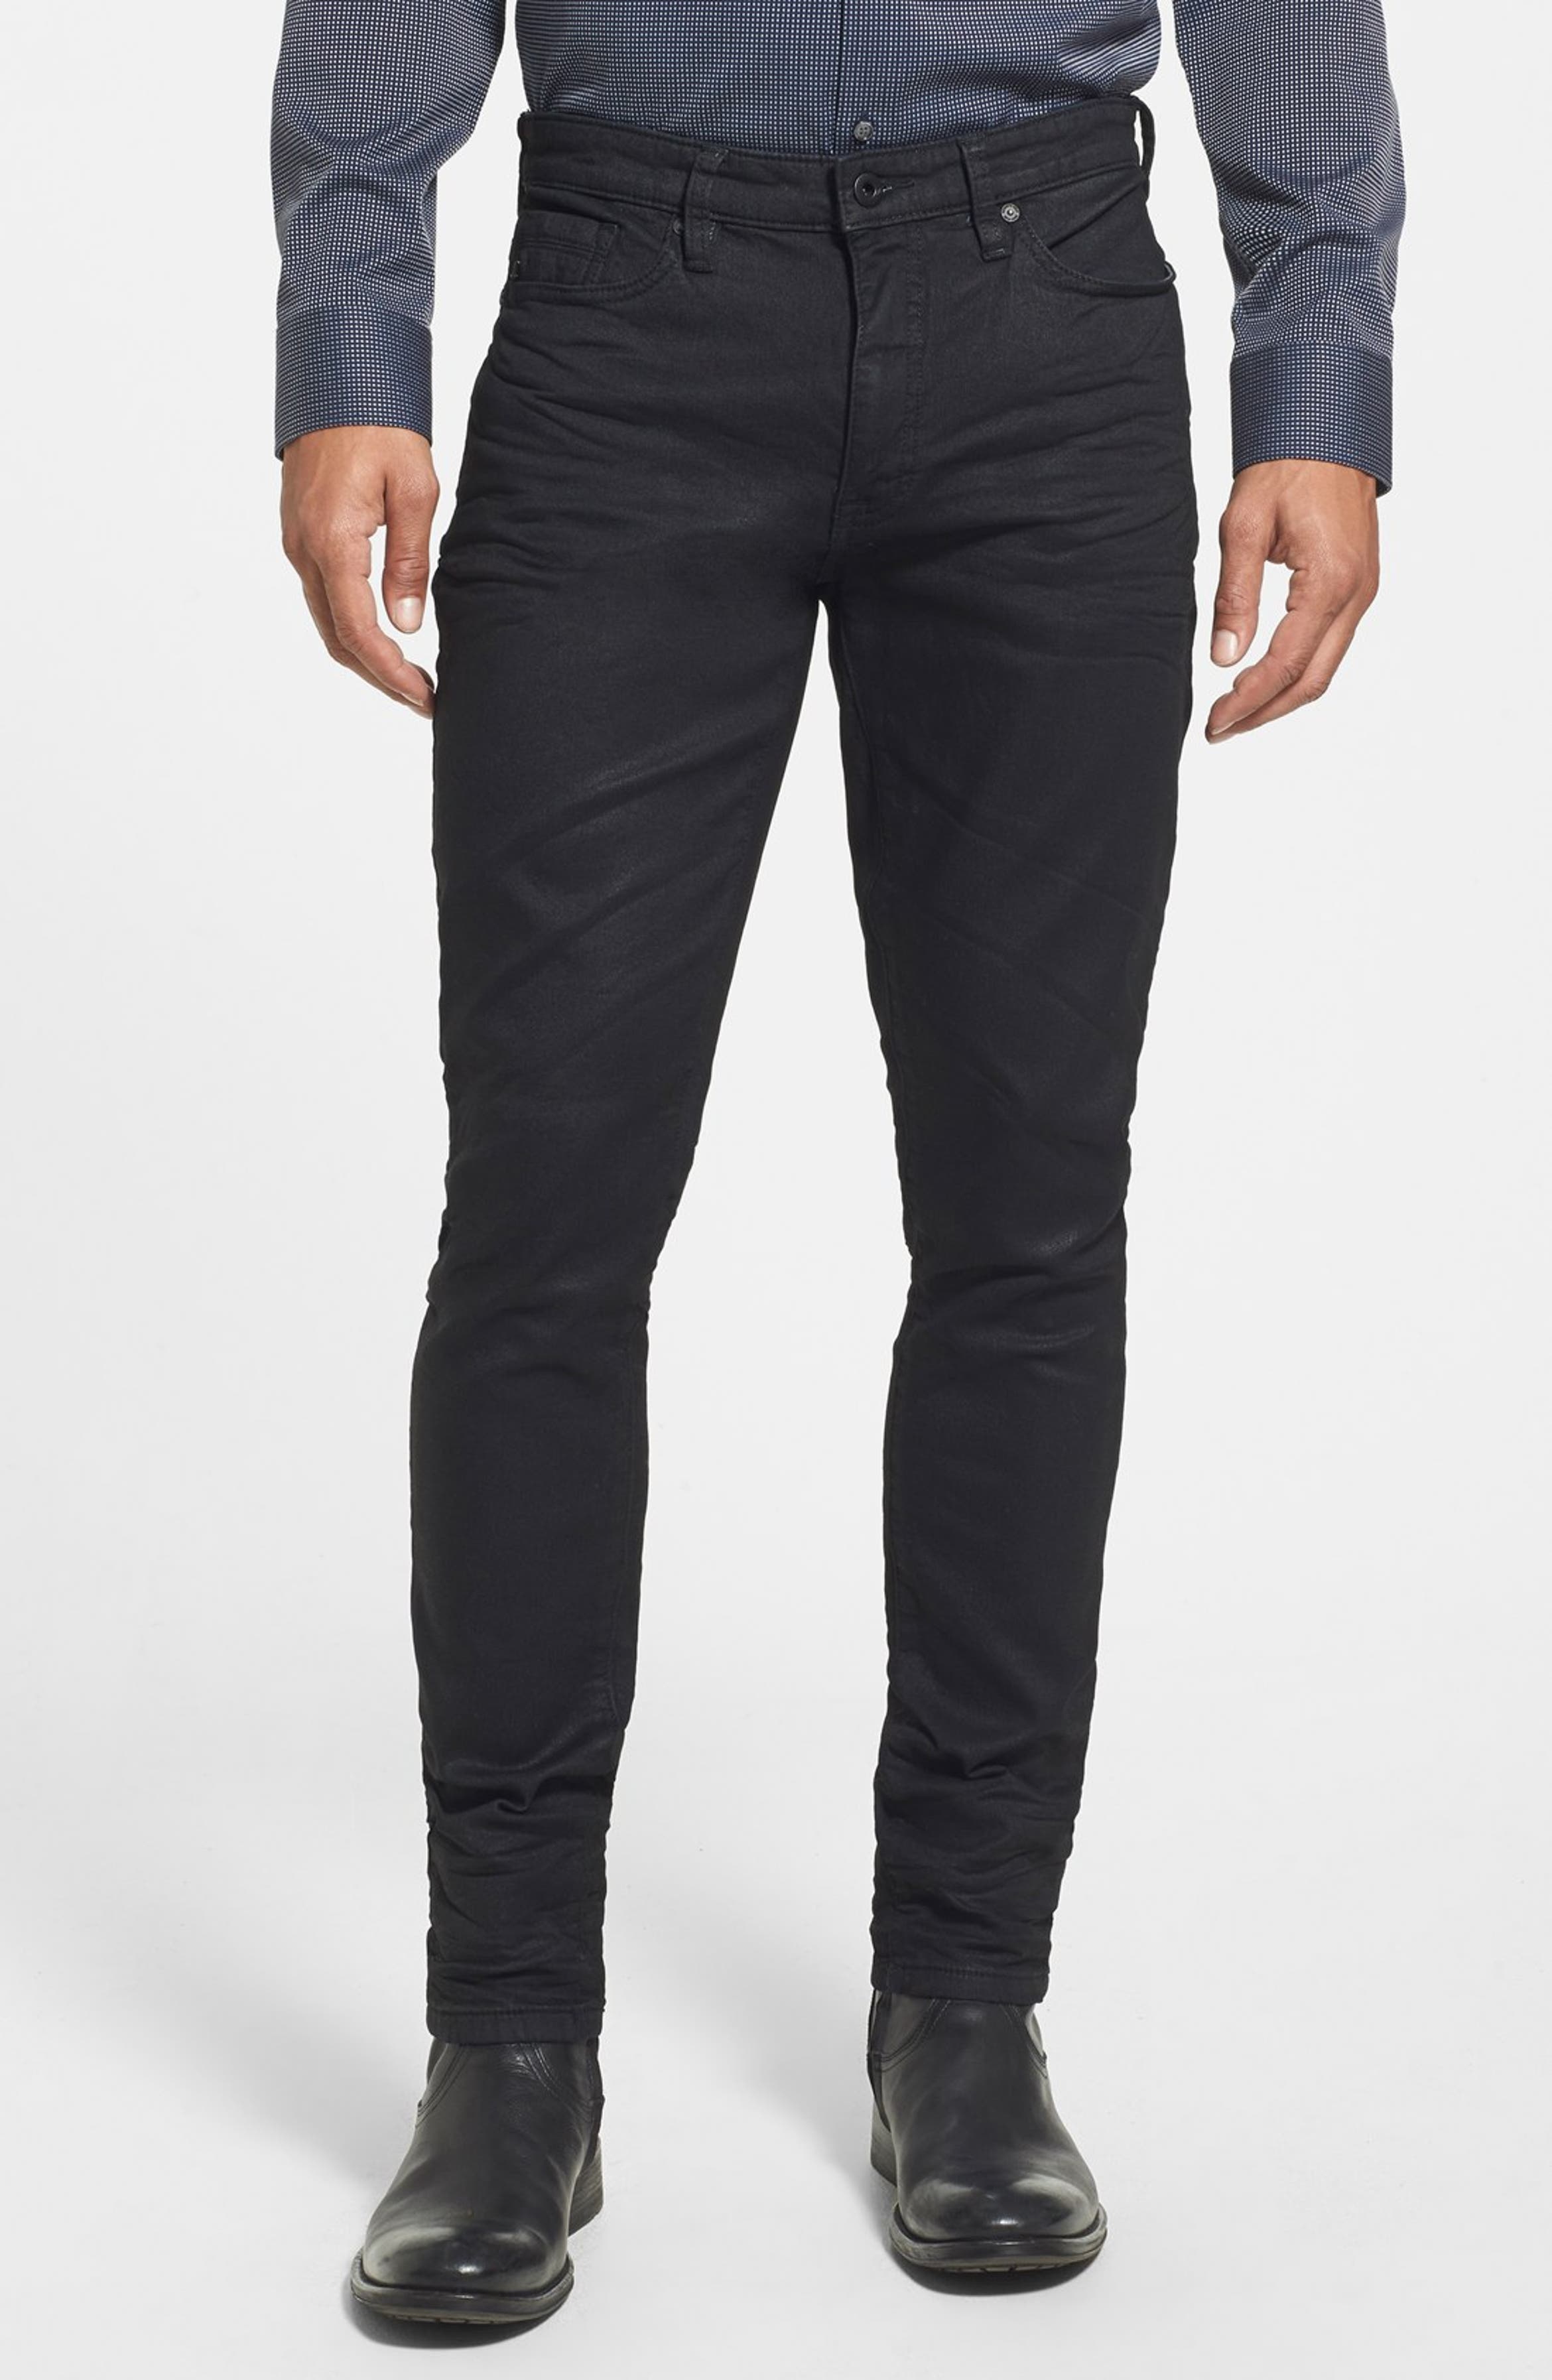 Kenneth Cole New York Skinny Pants | Nordstrom